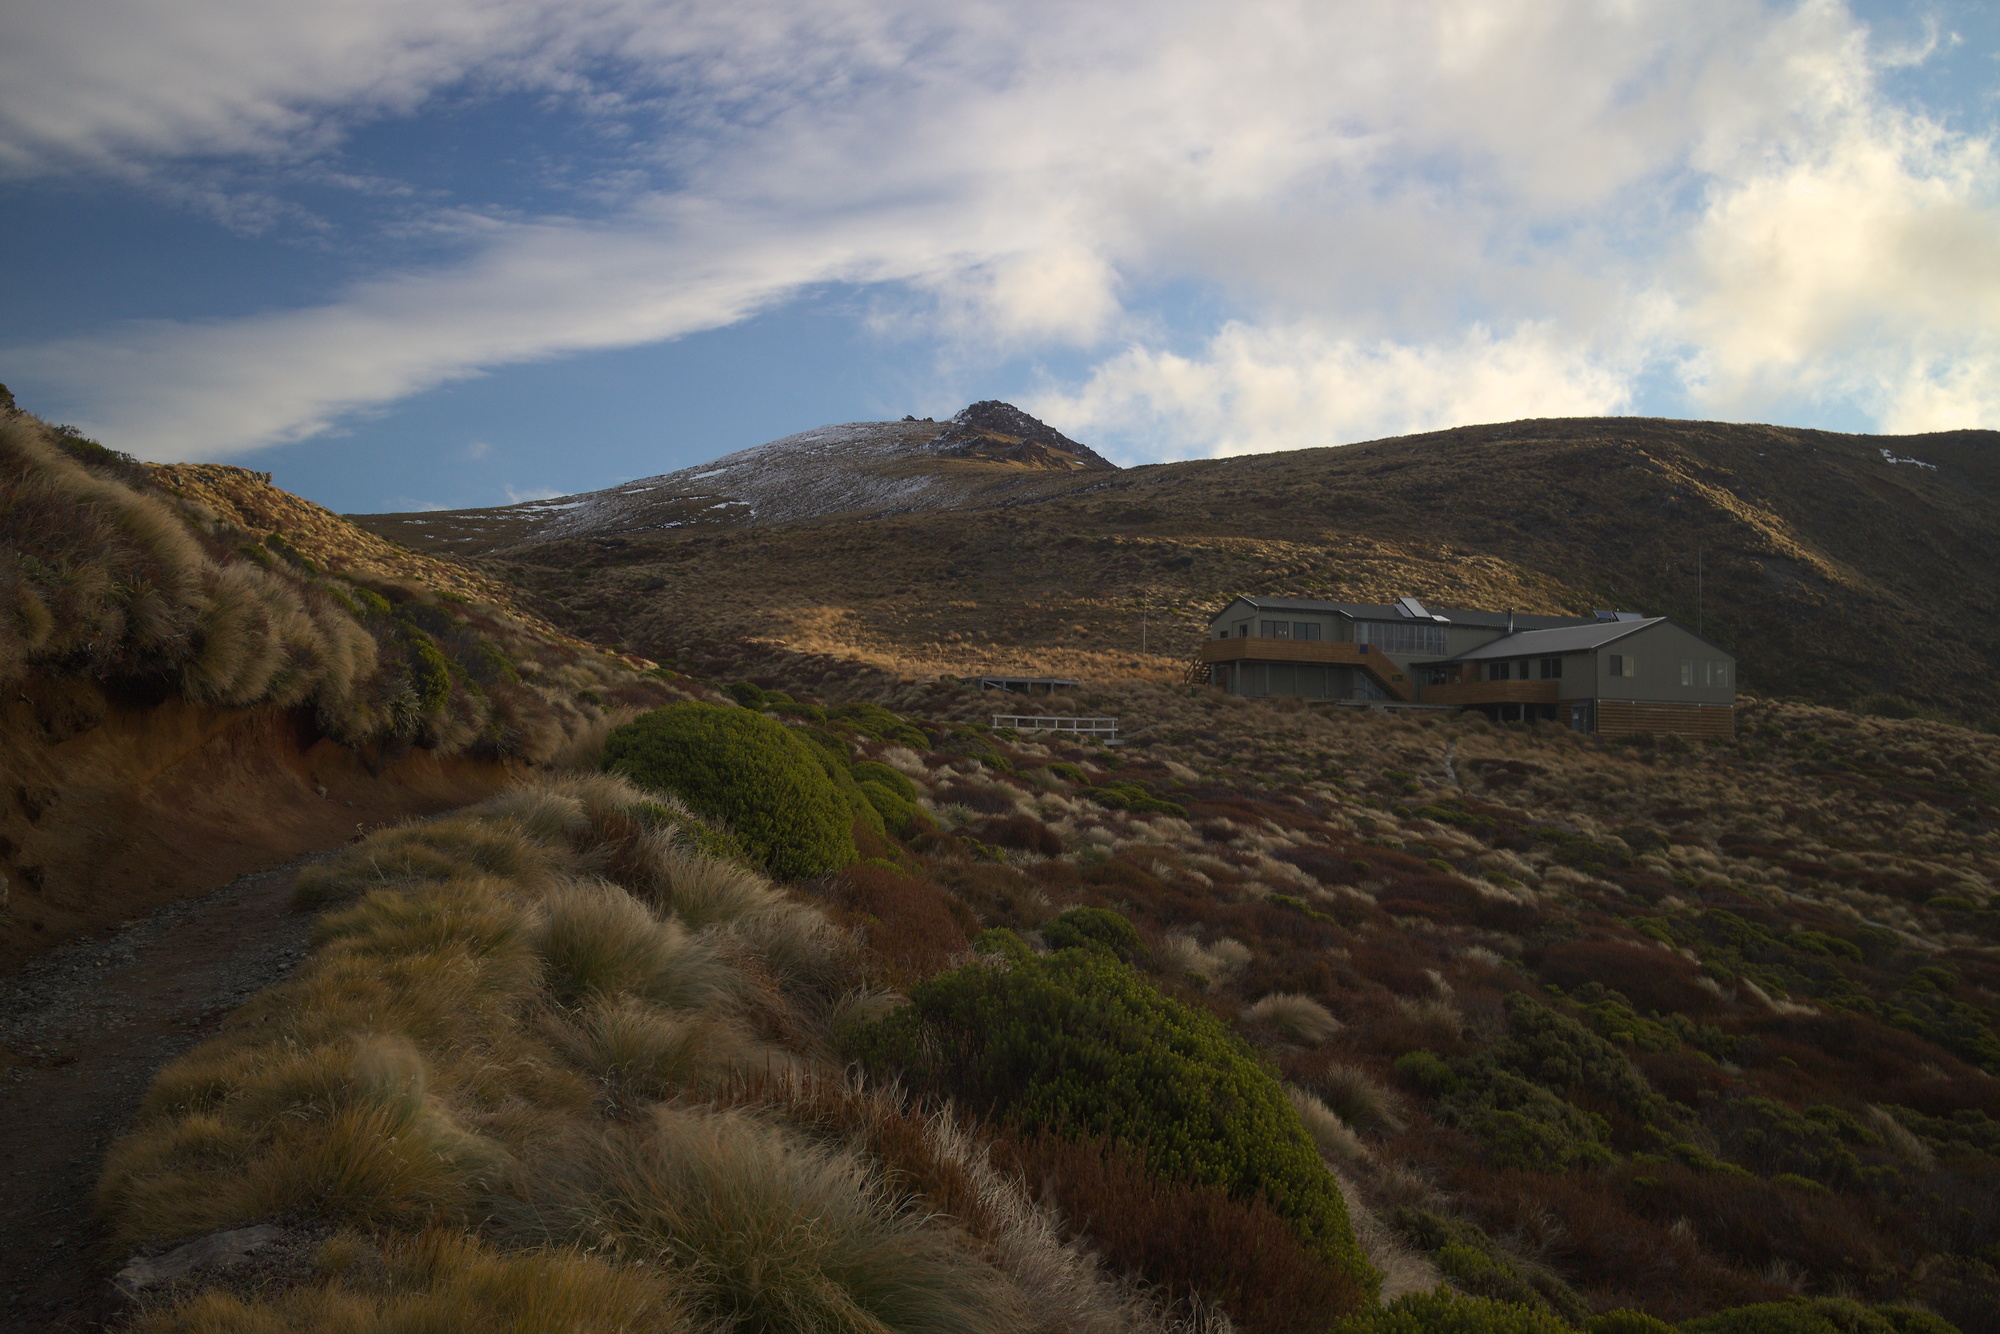 Luxmore Hut on the Kepler track in Fiordland National Park